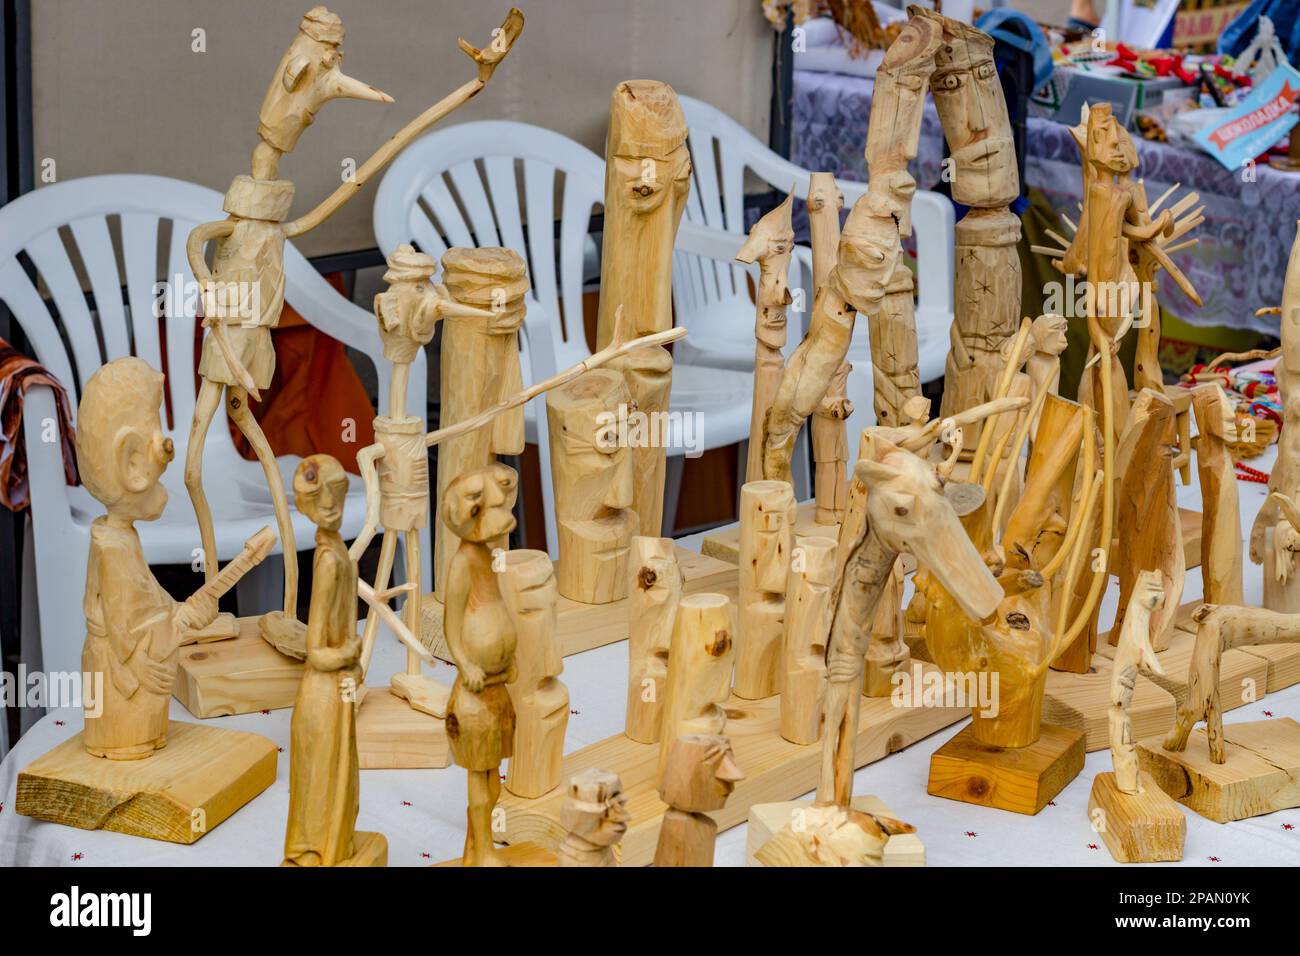 Obninsk, Russia - July 2018: Celebration of the City Day. Arts and crafts fair. Unusual wood products Stock Photo